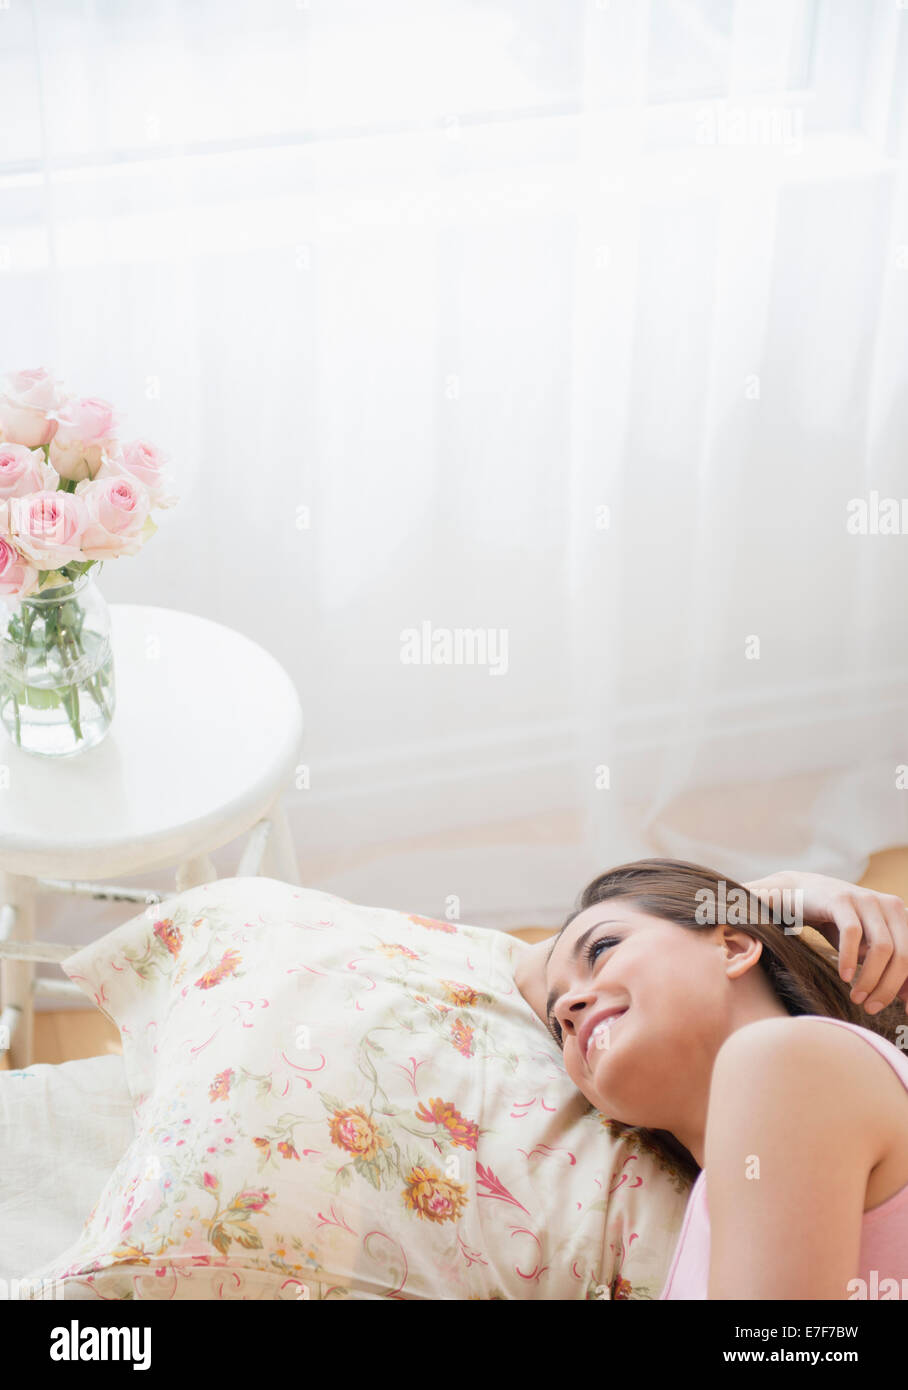 Woman relaxing on bed Stock Photo